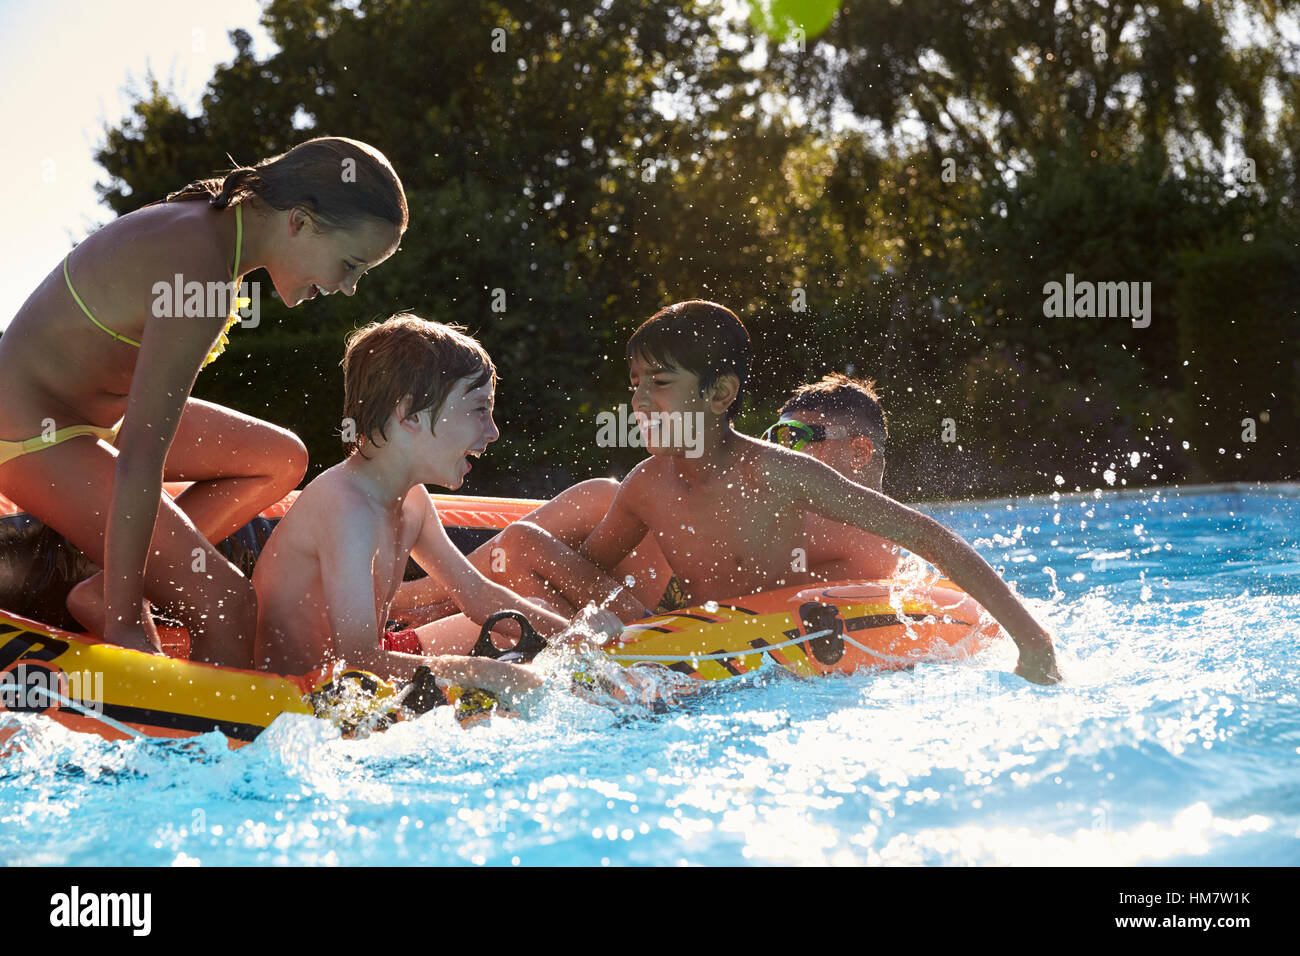 Children Having Fun On Inflatable In Outdoor Swimming Pool Stock Photo